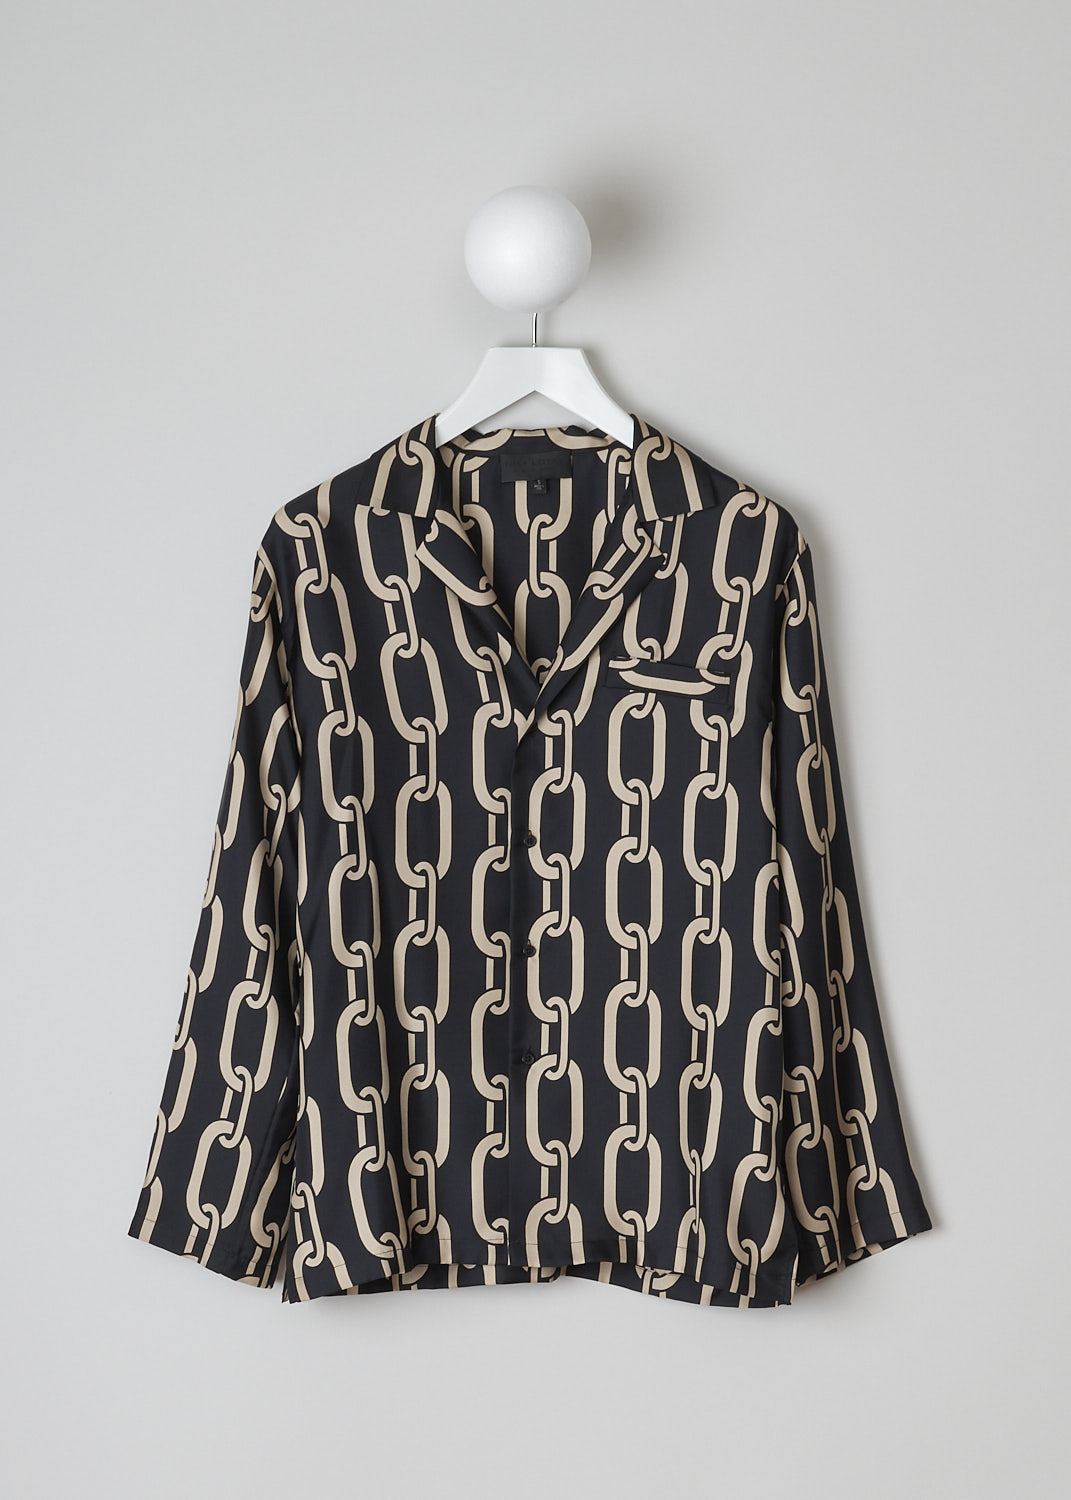 NILI LOTAN, JUSTE PYJAMA SHIRT WITH CHAINLINK PRINT, 12235_W856_JUSTE_PYJAMA_SHIRT, Black, Gold, Print, Front, This silk Juste Pyjama shirt has a black base with an all-over chainlink print in gold. The blouse has a notched lapel, a front button closure and a breast pocket. The blouse has a straight hemline with small side slits.  
